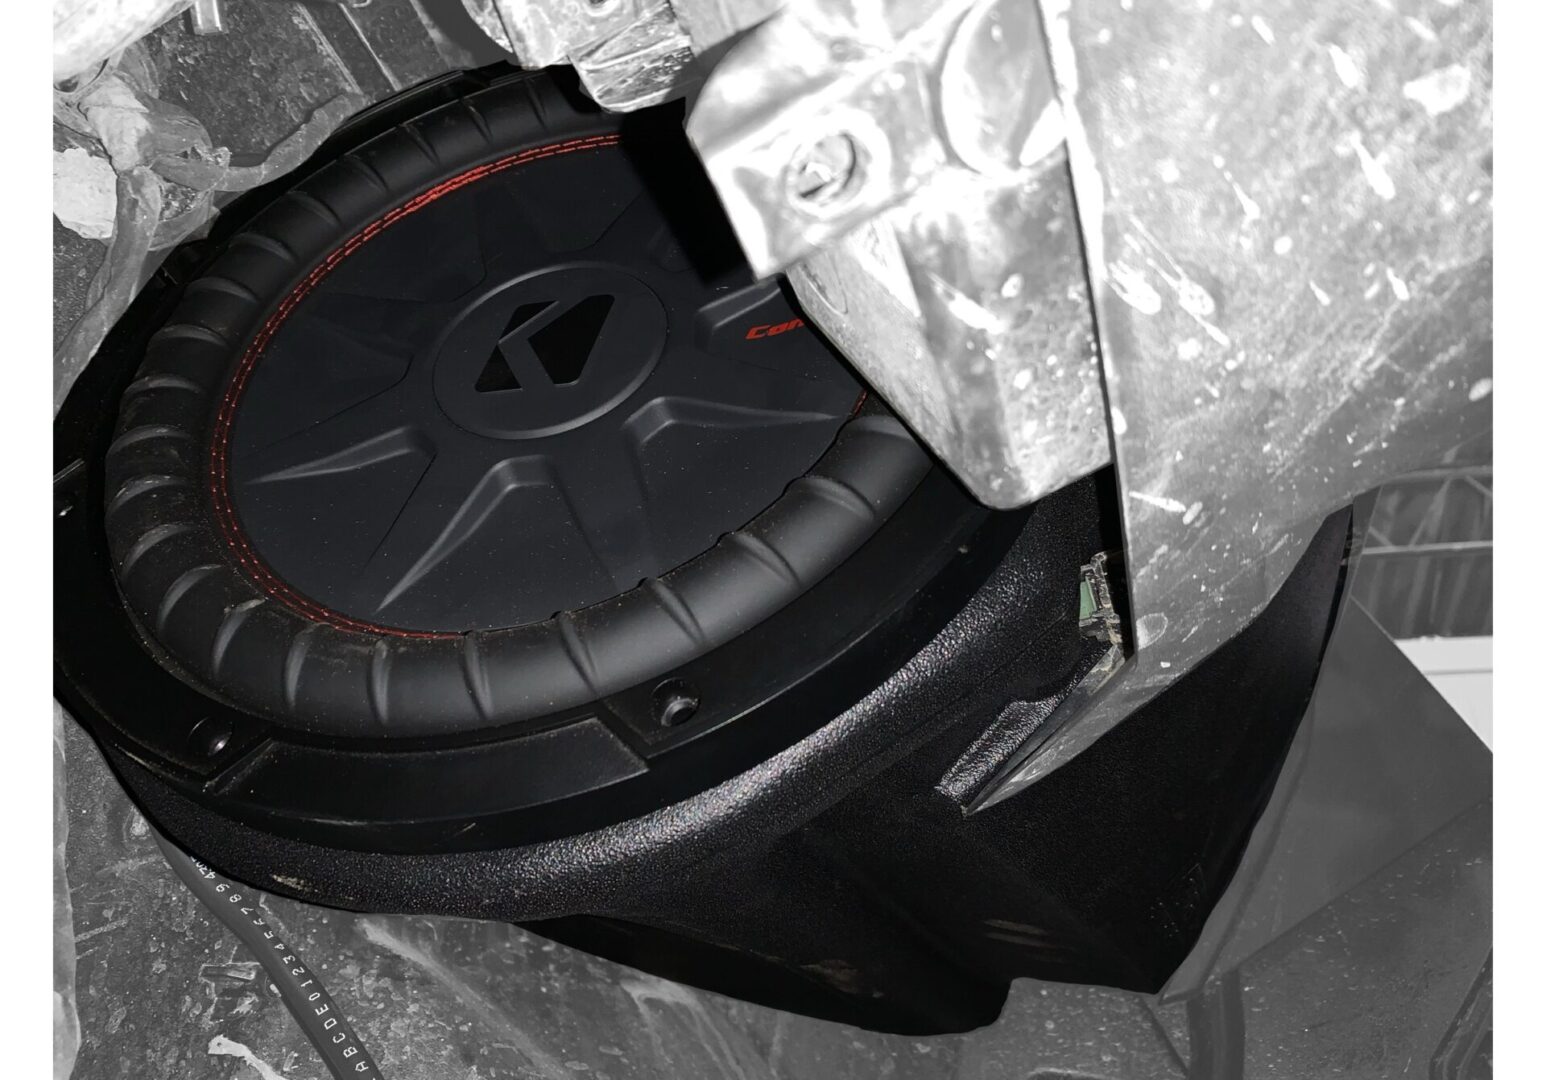 Image of a kicker 8 inch subwoofer